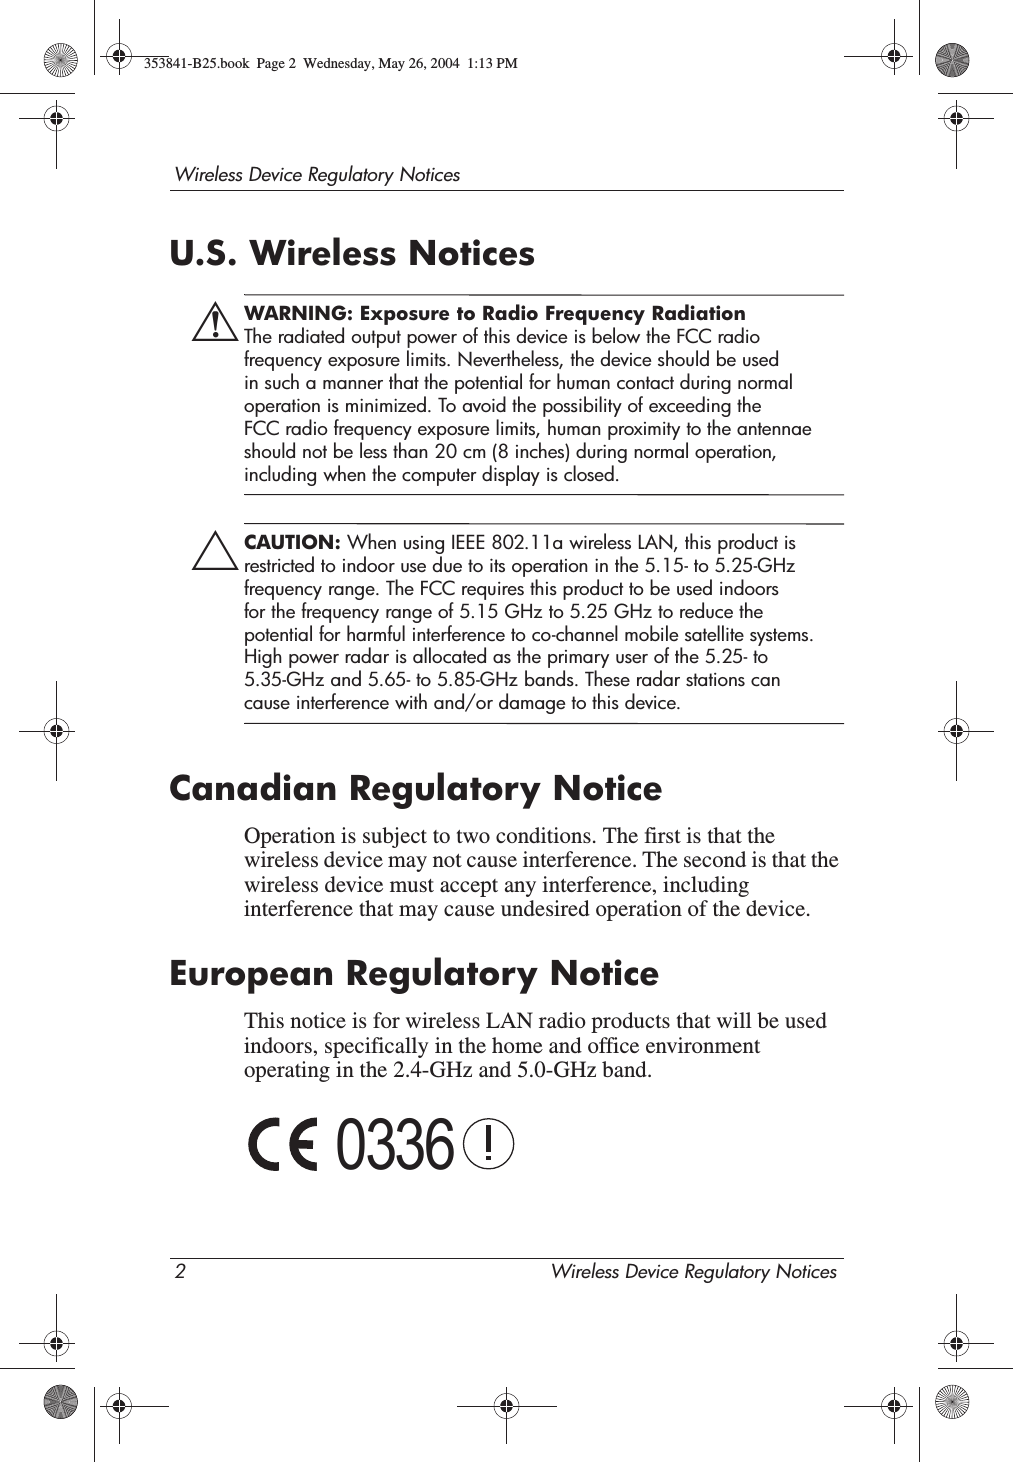 2 Wireless Device Regulatory NoticesWireless Device Regulatory NoticesU.S. Wireless NoticesÅWARNING: Exposure to Radio Frequency Radiation The radiated output power of this device is below the FCC radio frequency exposure limits. Nevertheless, the device should be used in such a manner that the potential for human contact during normal operation is minimized. To avoid the possibility of exceeding the FCC radio frequency exposure limits, human proximity to the antennae should not be less than 20 cm (8 inches) during normal operation, including when the computer display is closed.ÄCAUTION: When using IEEE 802.11a wireless LAN, this product is restricted to indoor use due to its operation in the 5.15- to 5.25-GHz frequency range. The FCC requires this product to be used indoors for the frequency range of 5.15 GHz to 5.25 GHz to reduce the potential for harmful interference to co-channel mobile satellite systems. High power radar is allocated as the primary user of the 5.25- to 5.35-GHz and 5.65- to 5.85-GHz bands. These radar stations can cause interference with and/or damage to this device.Canadian Regulatory NoticeOperation is subject to two conditions. The first is that the wireless device may not cause interference. The second is that the wireless device must accept any interference, including interference that may cause undesired operation of the device.European Regulatory NoticeThis notice is for wireless LAN radio products that will be used indoors, specifically in the home and office environment operating in the 2.4-GHz and 5.0-GHz band.0336353841-B25.book  Page 2  Wednesday, May 26, 2004  1:13 PM